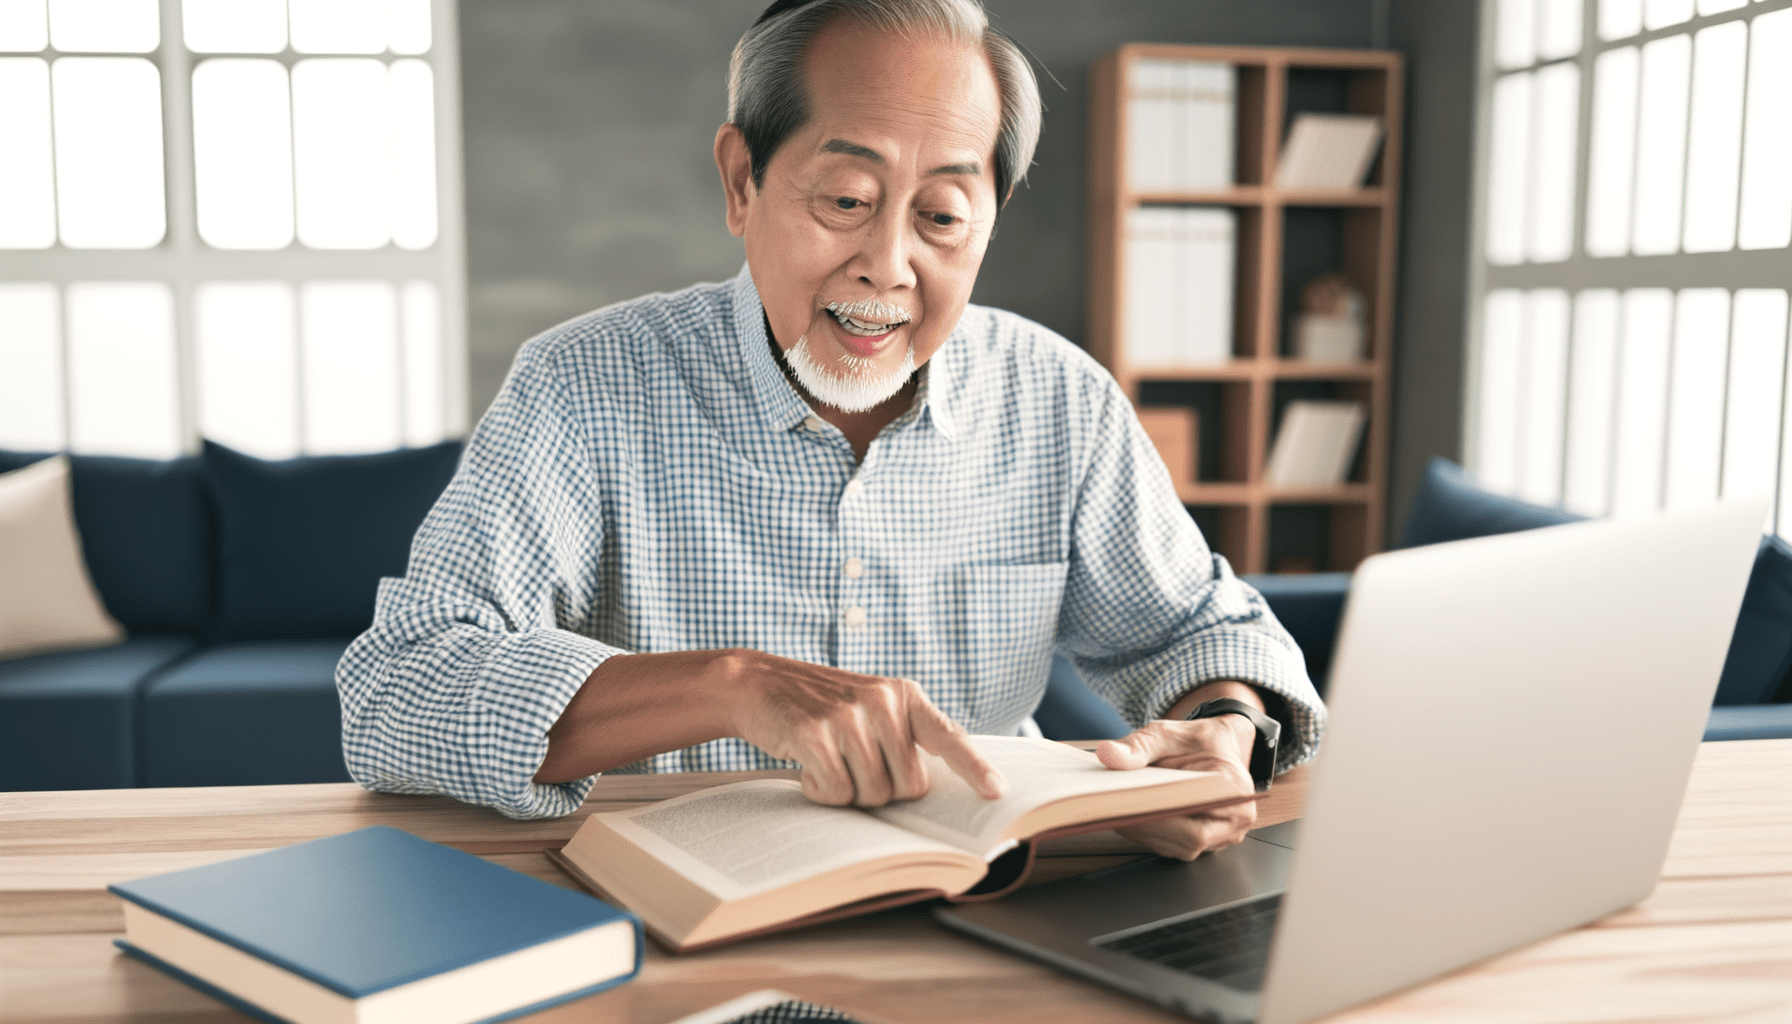 The Renaissance Senior: Exploring Education and Personal Growth